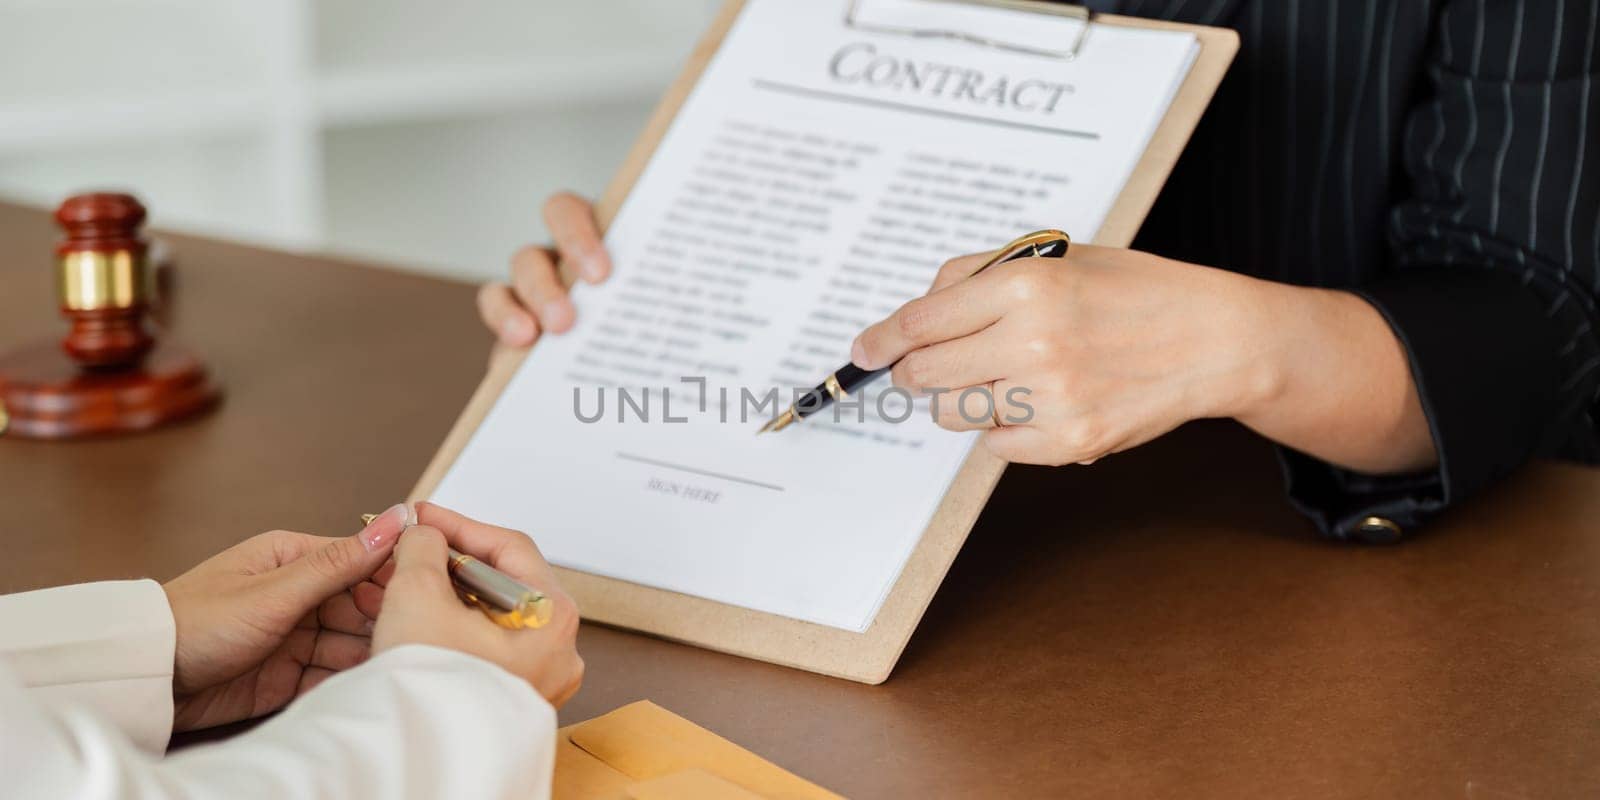 Two people are sitting at a table with pens and papers in front of them. They are discussing something important